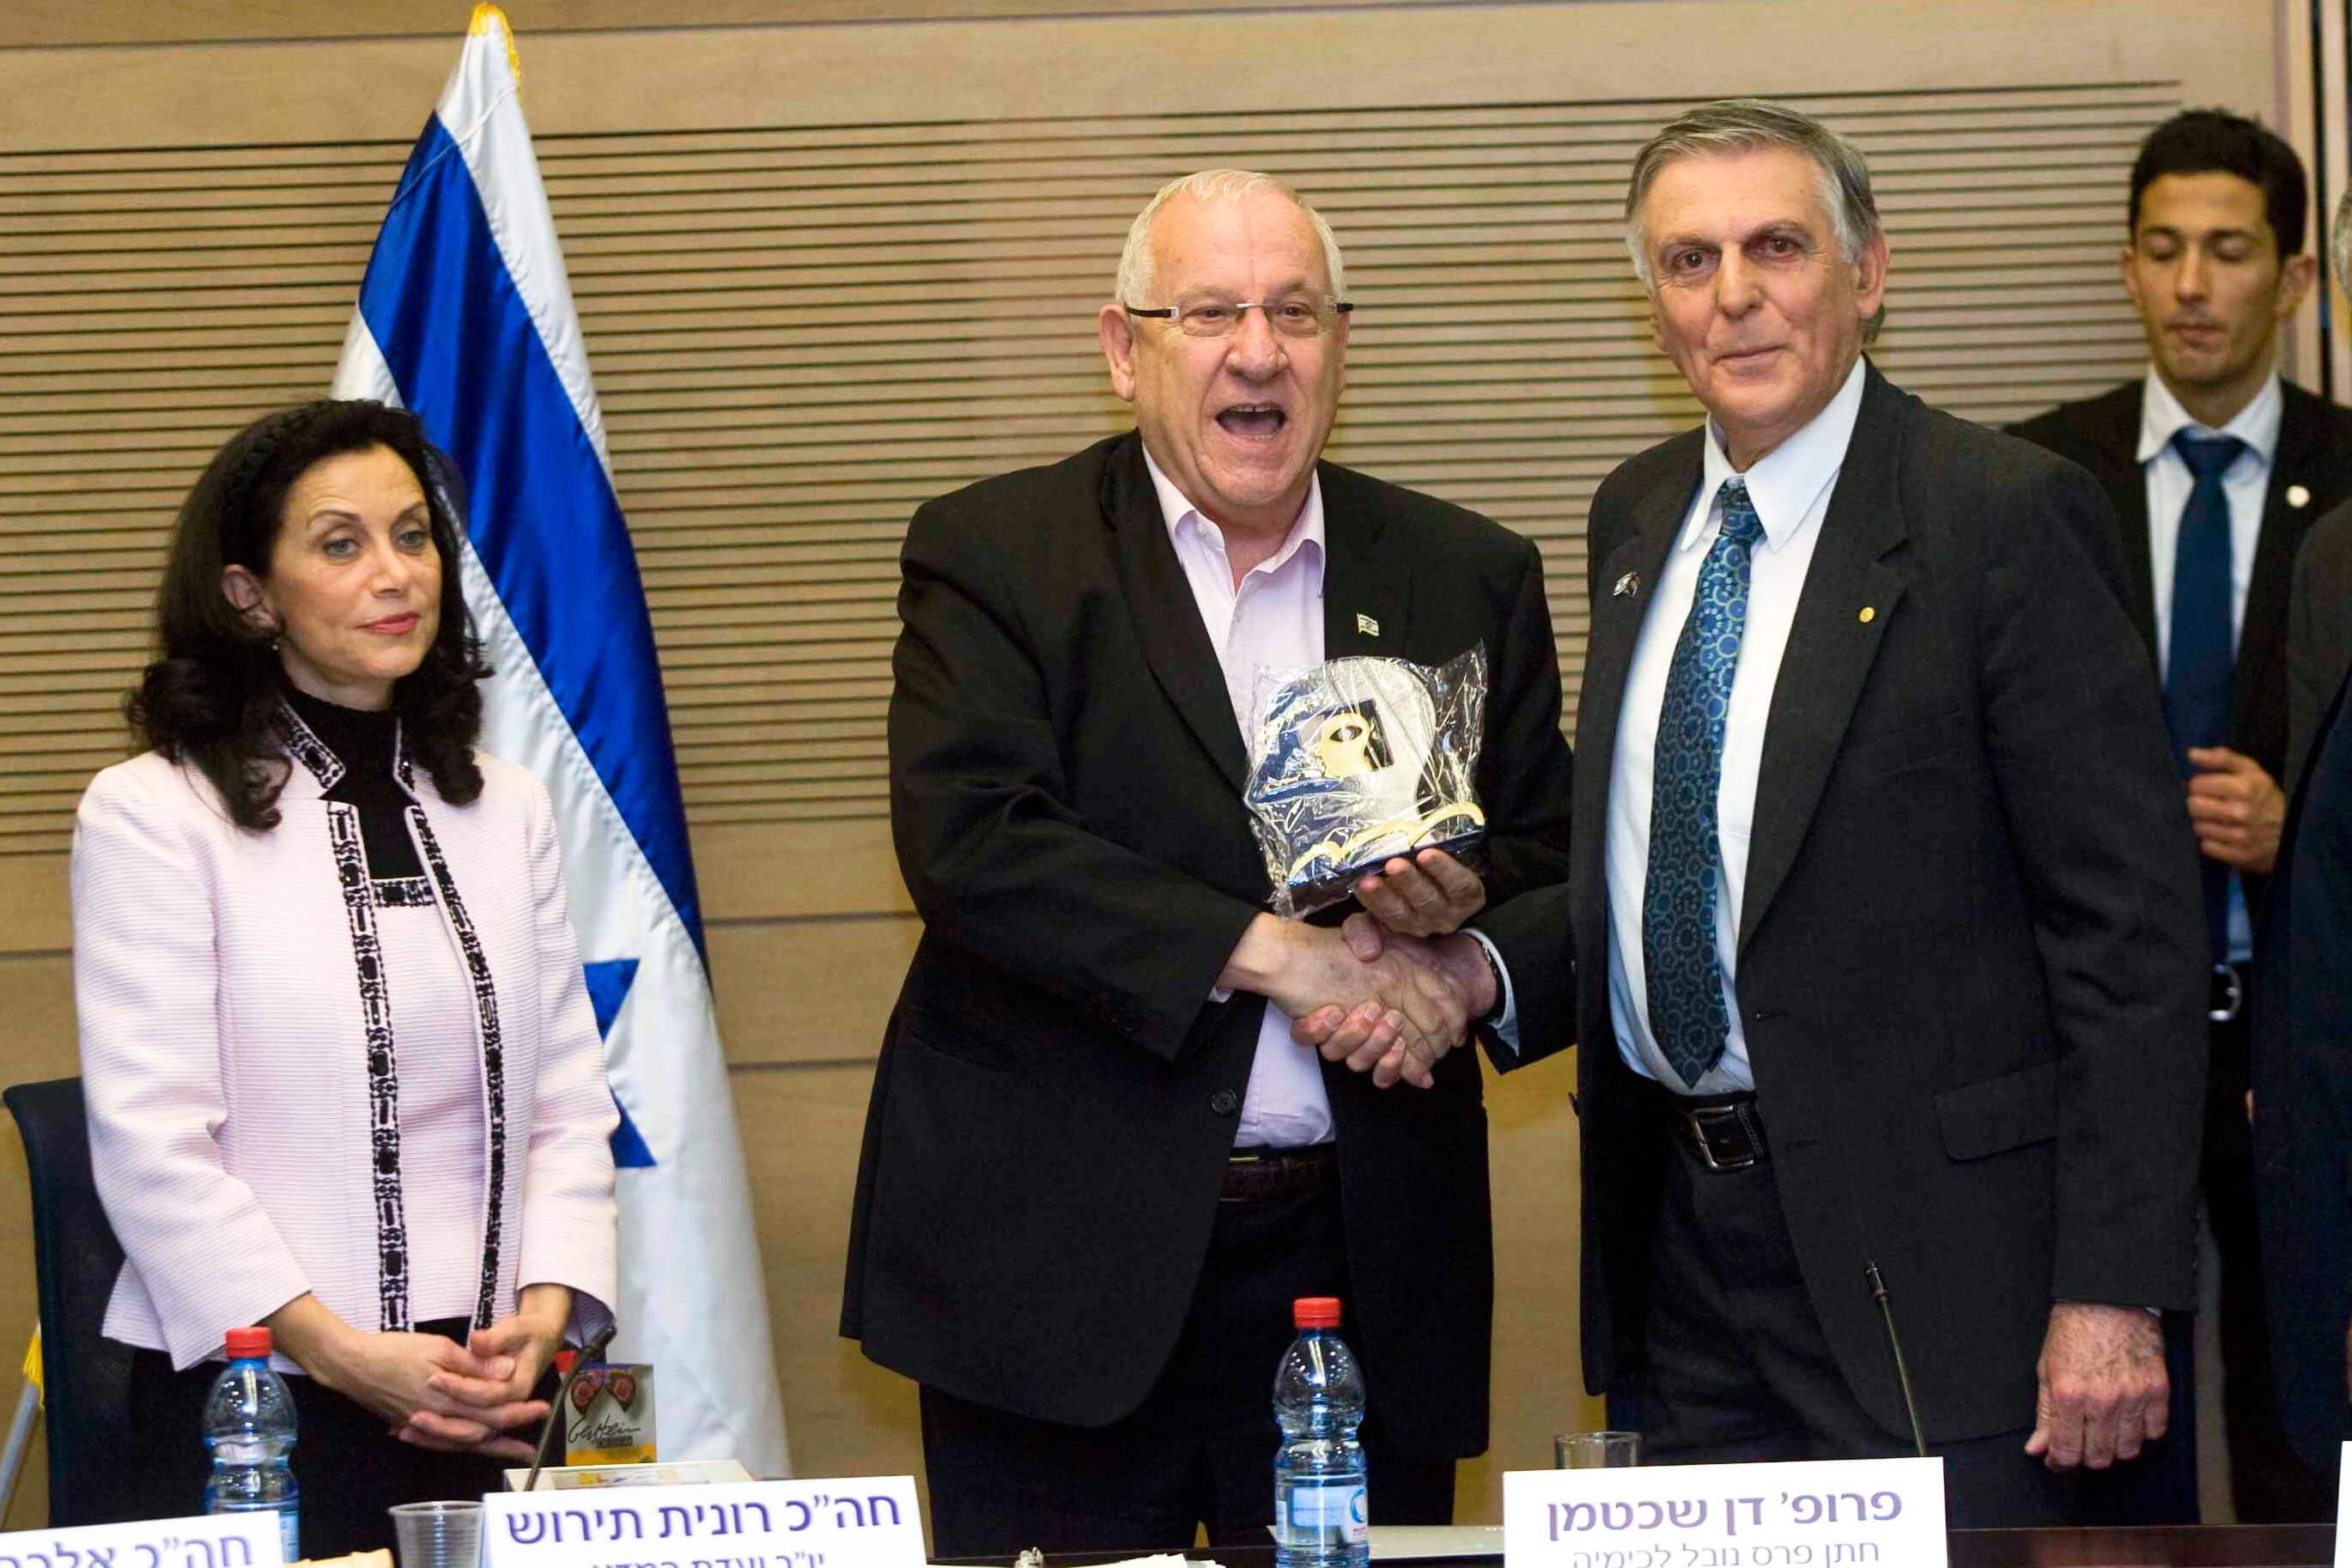 Prof. Dan Shechtman receives an honorary statuette from Knesset Speaker Reuven Rivlin. Next to them is MK Ronit Tirosh. PR photo, Israel Sun